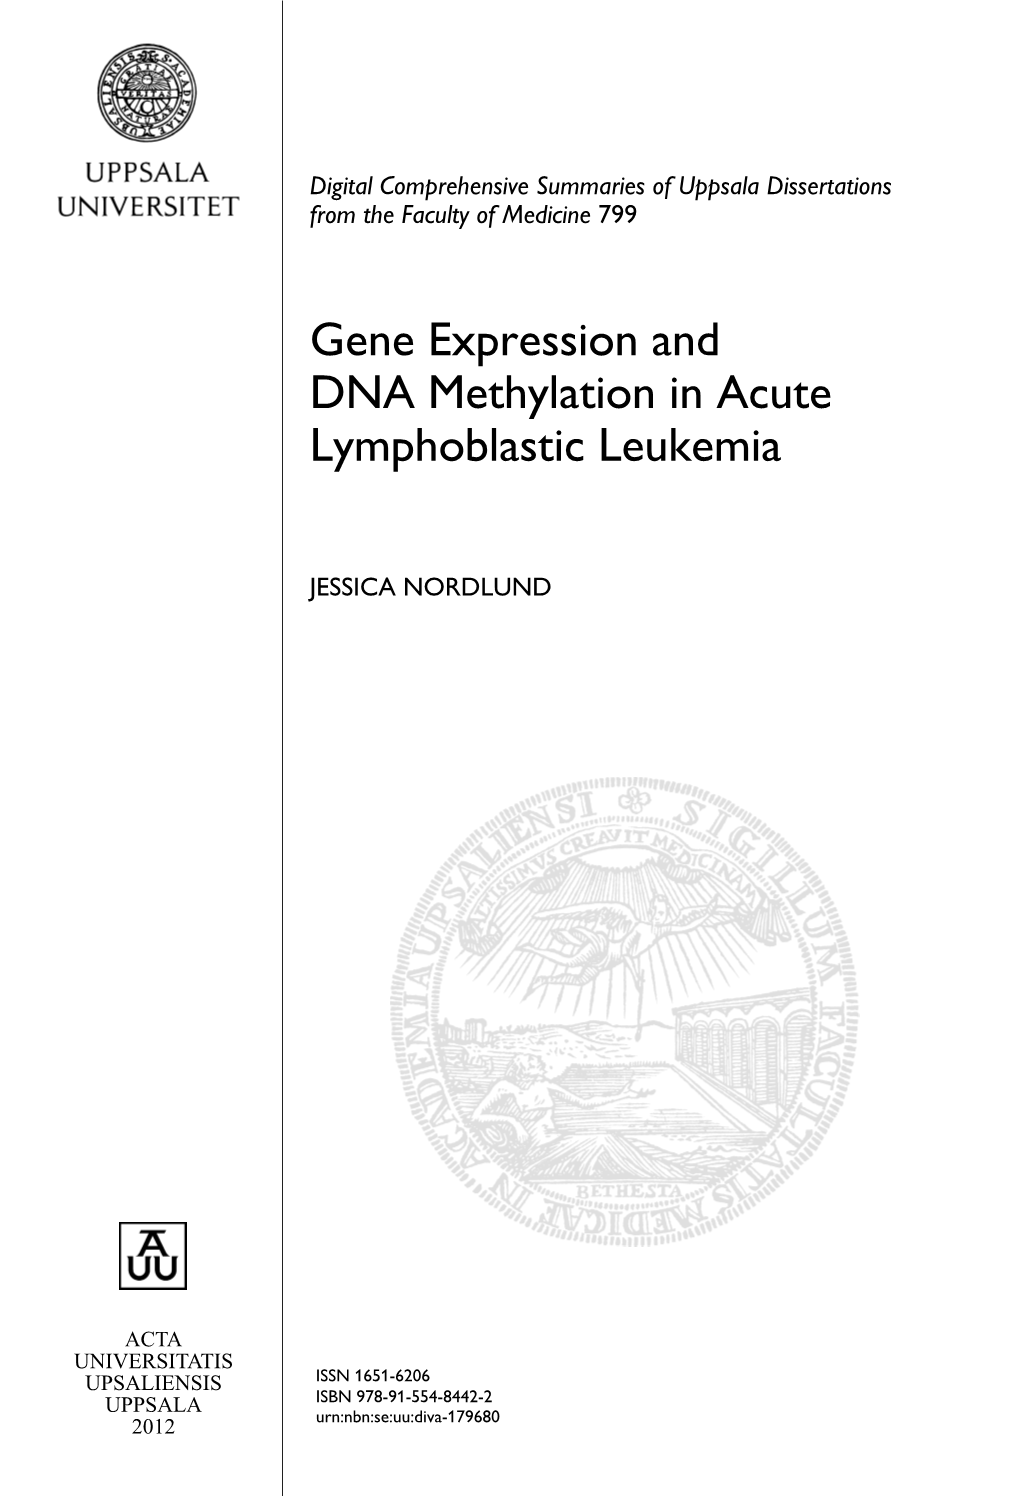 Gene Expression and DNA Methylation in Acute Lymphoblastic